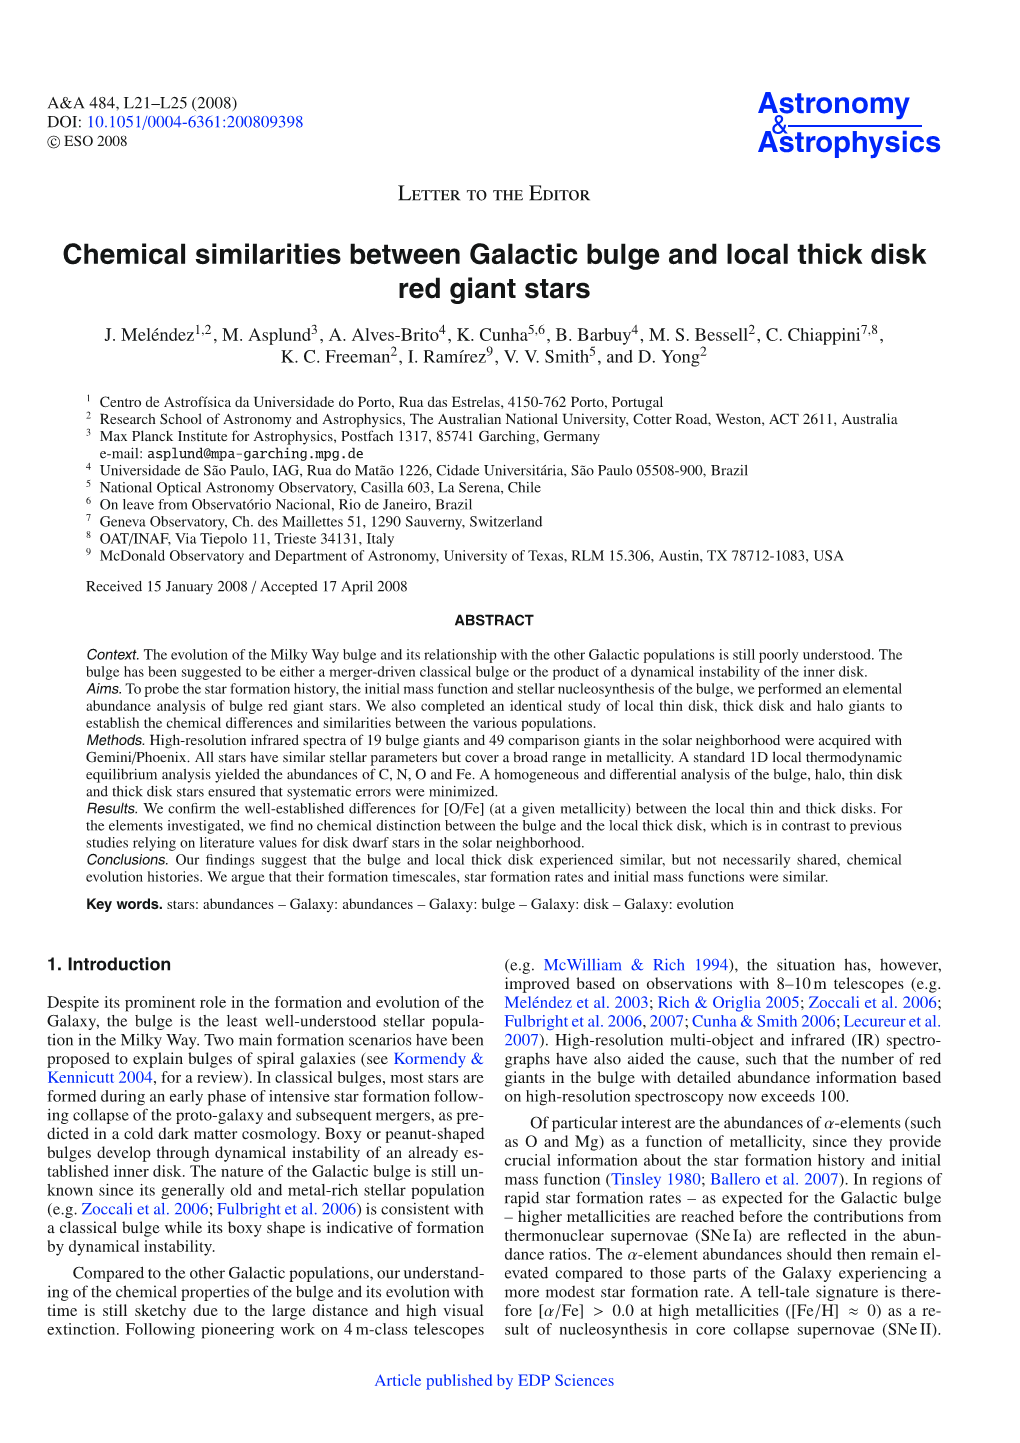 Chemical Similarities Between Galactic Bulge and Local Thick Disk Red Giant Stars